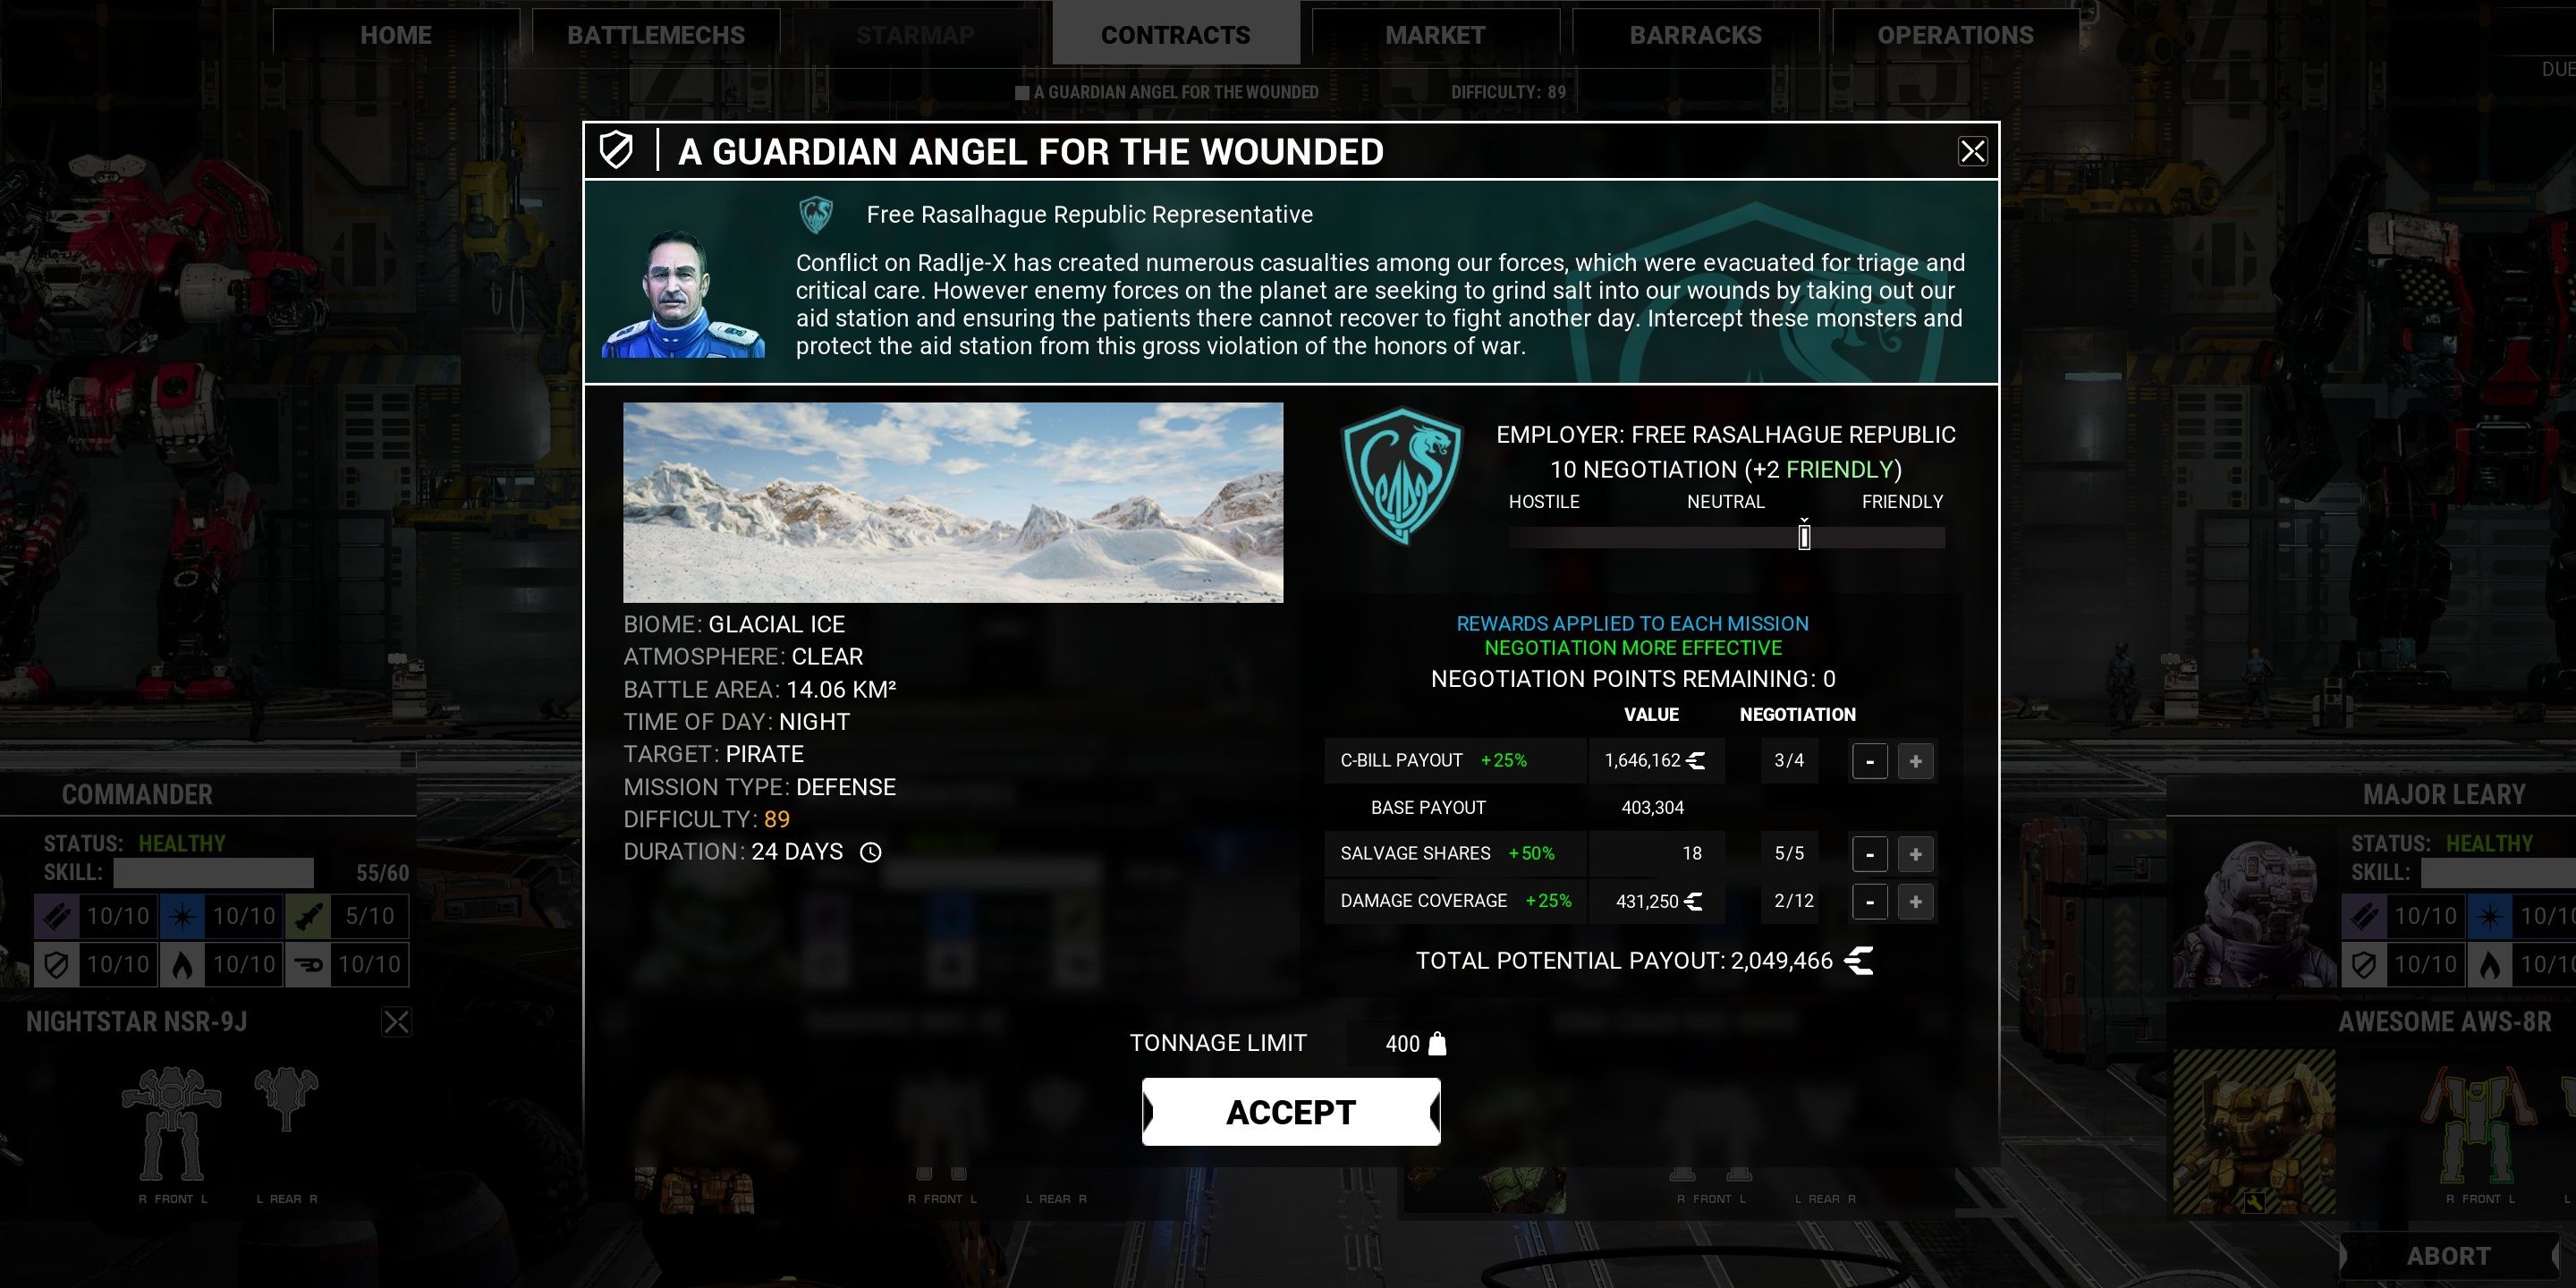 Contracts are now open to renegotiation in MechWarrior 5